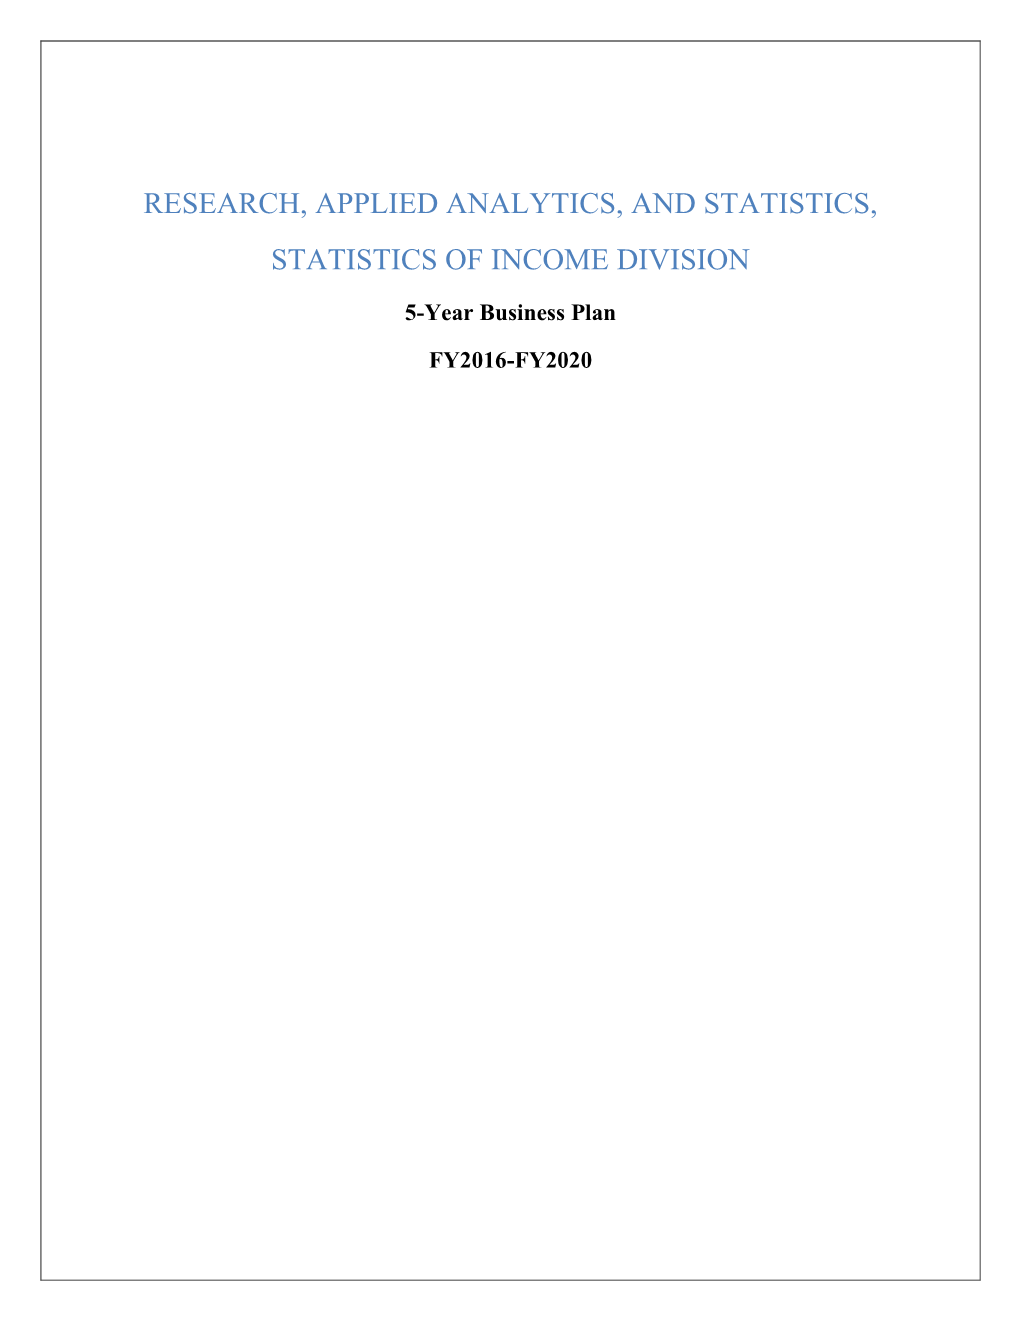 Research, Applied Analytics, and Statistics, Statistics of Income Division